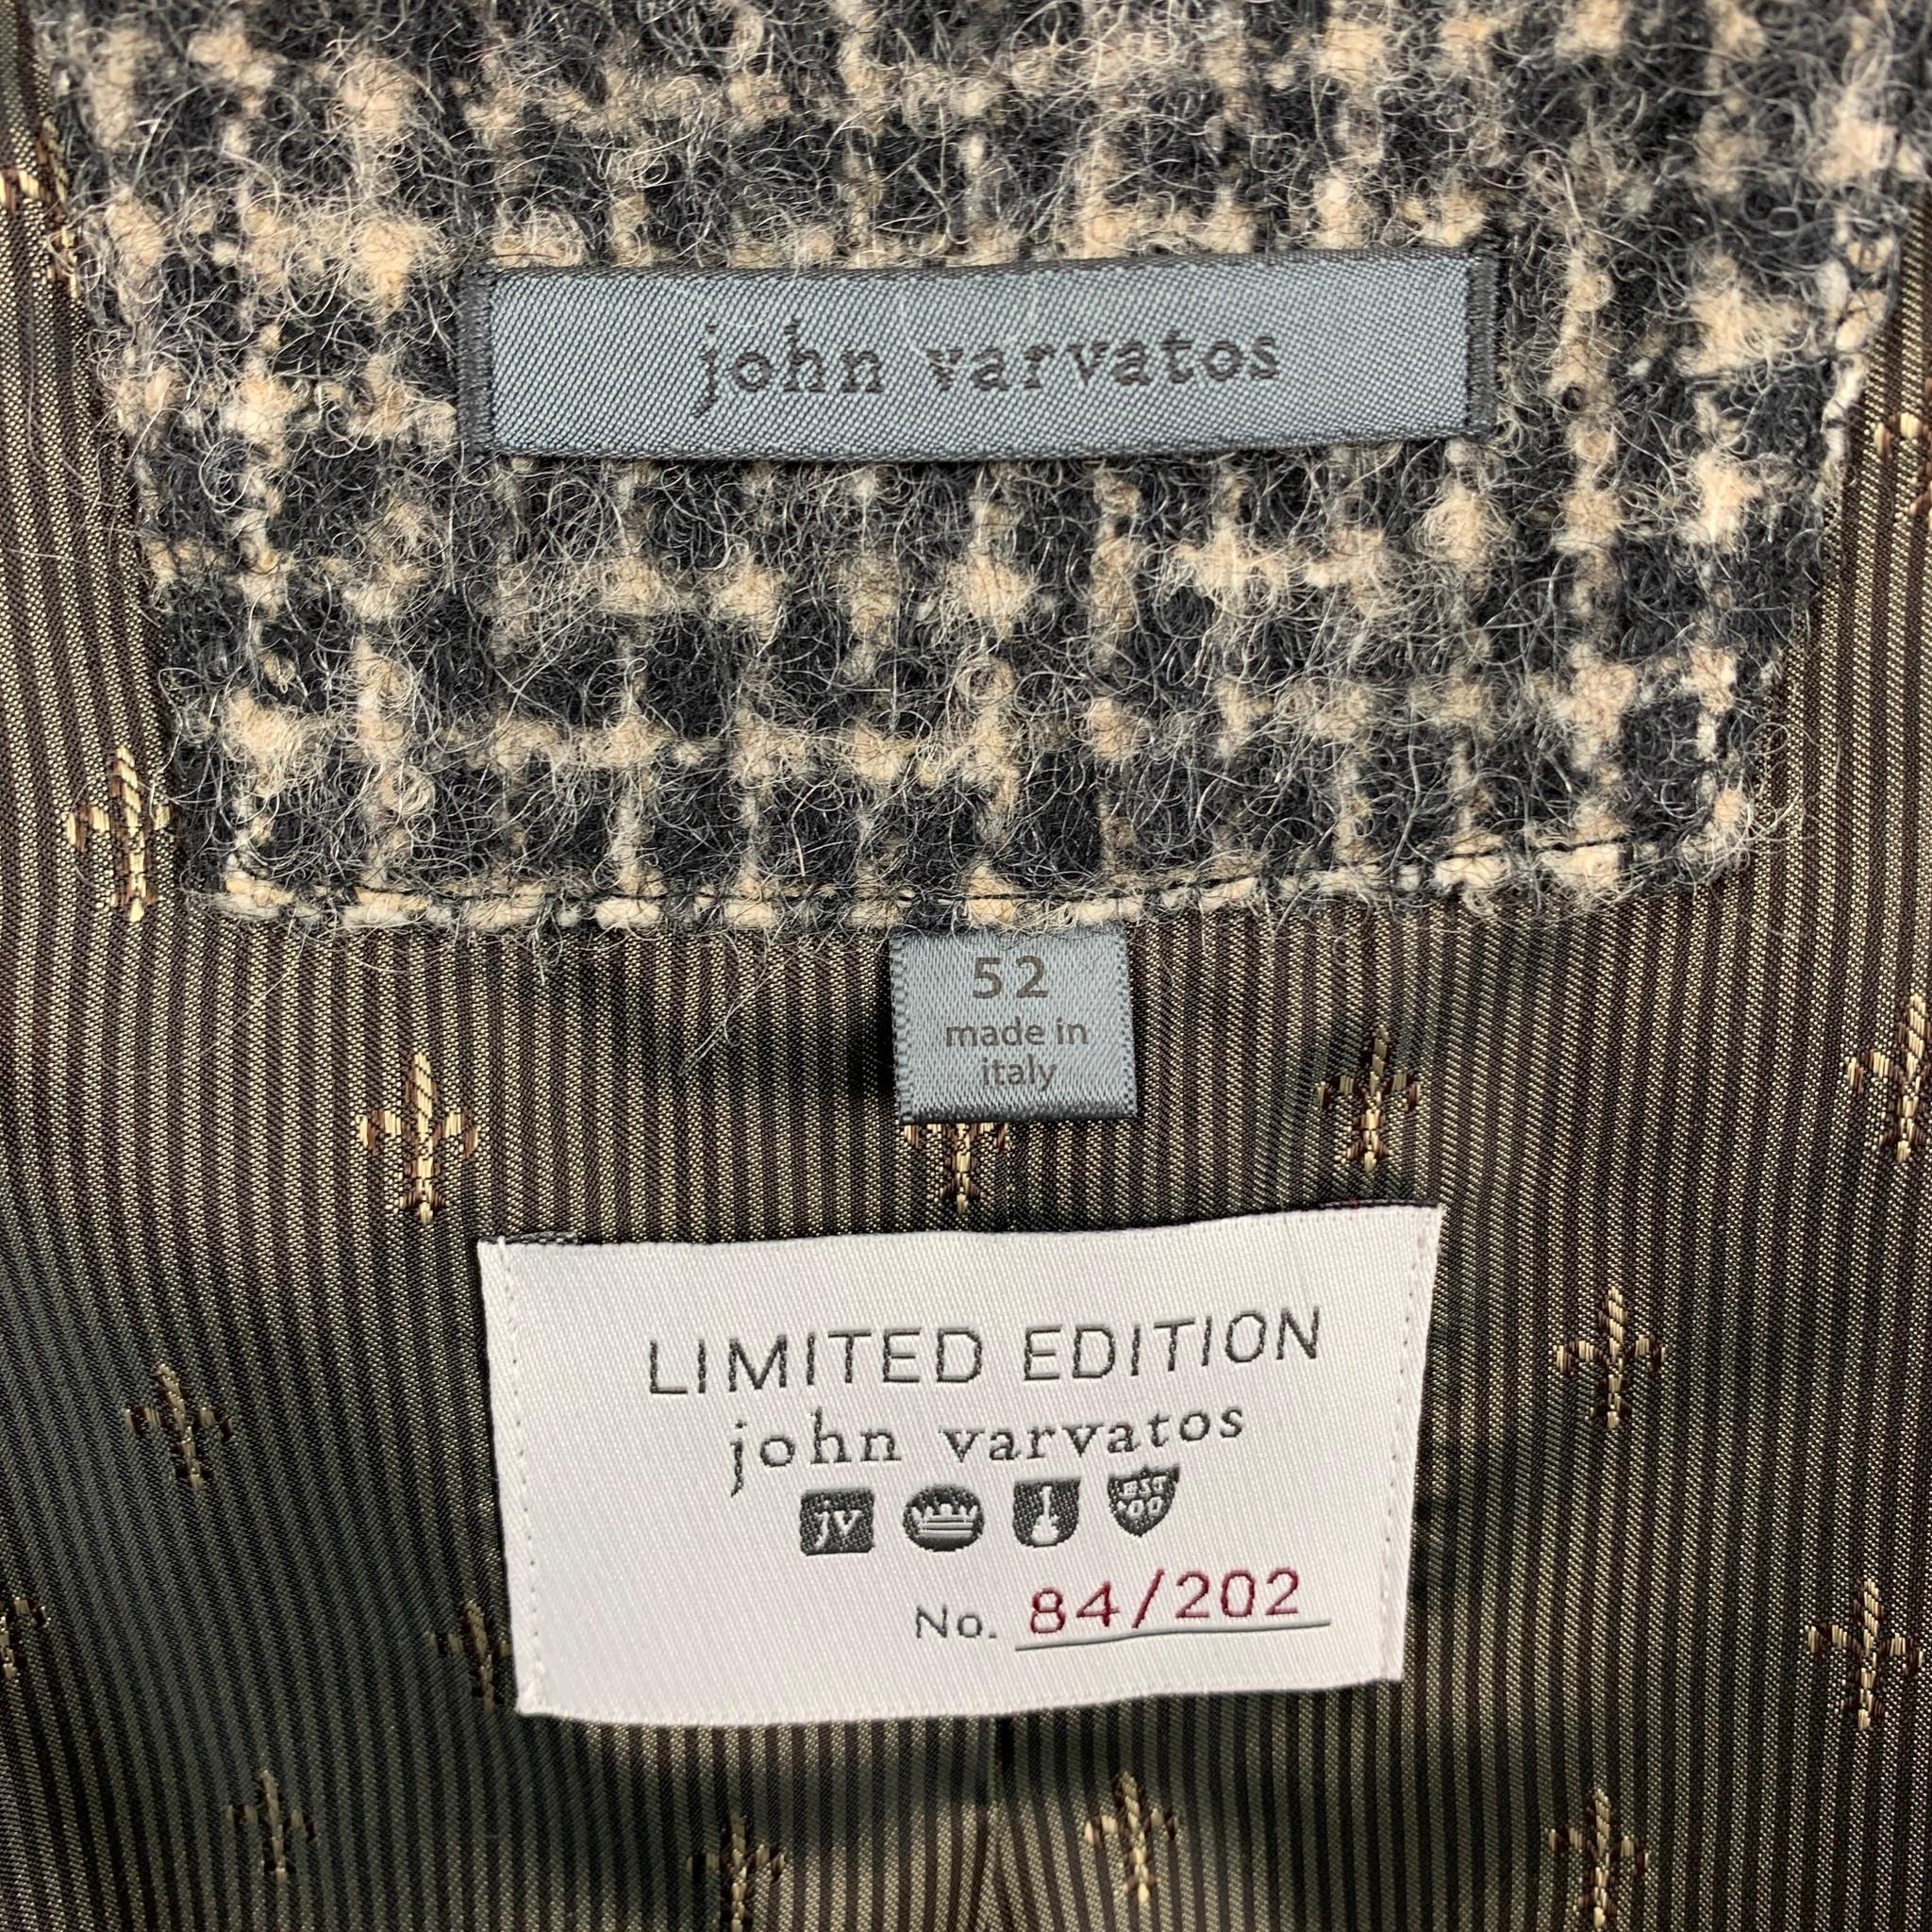 JOHN VARVATOS Limited Edition Size 42 Black Cream Checkered Single Breasted Coat 2